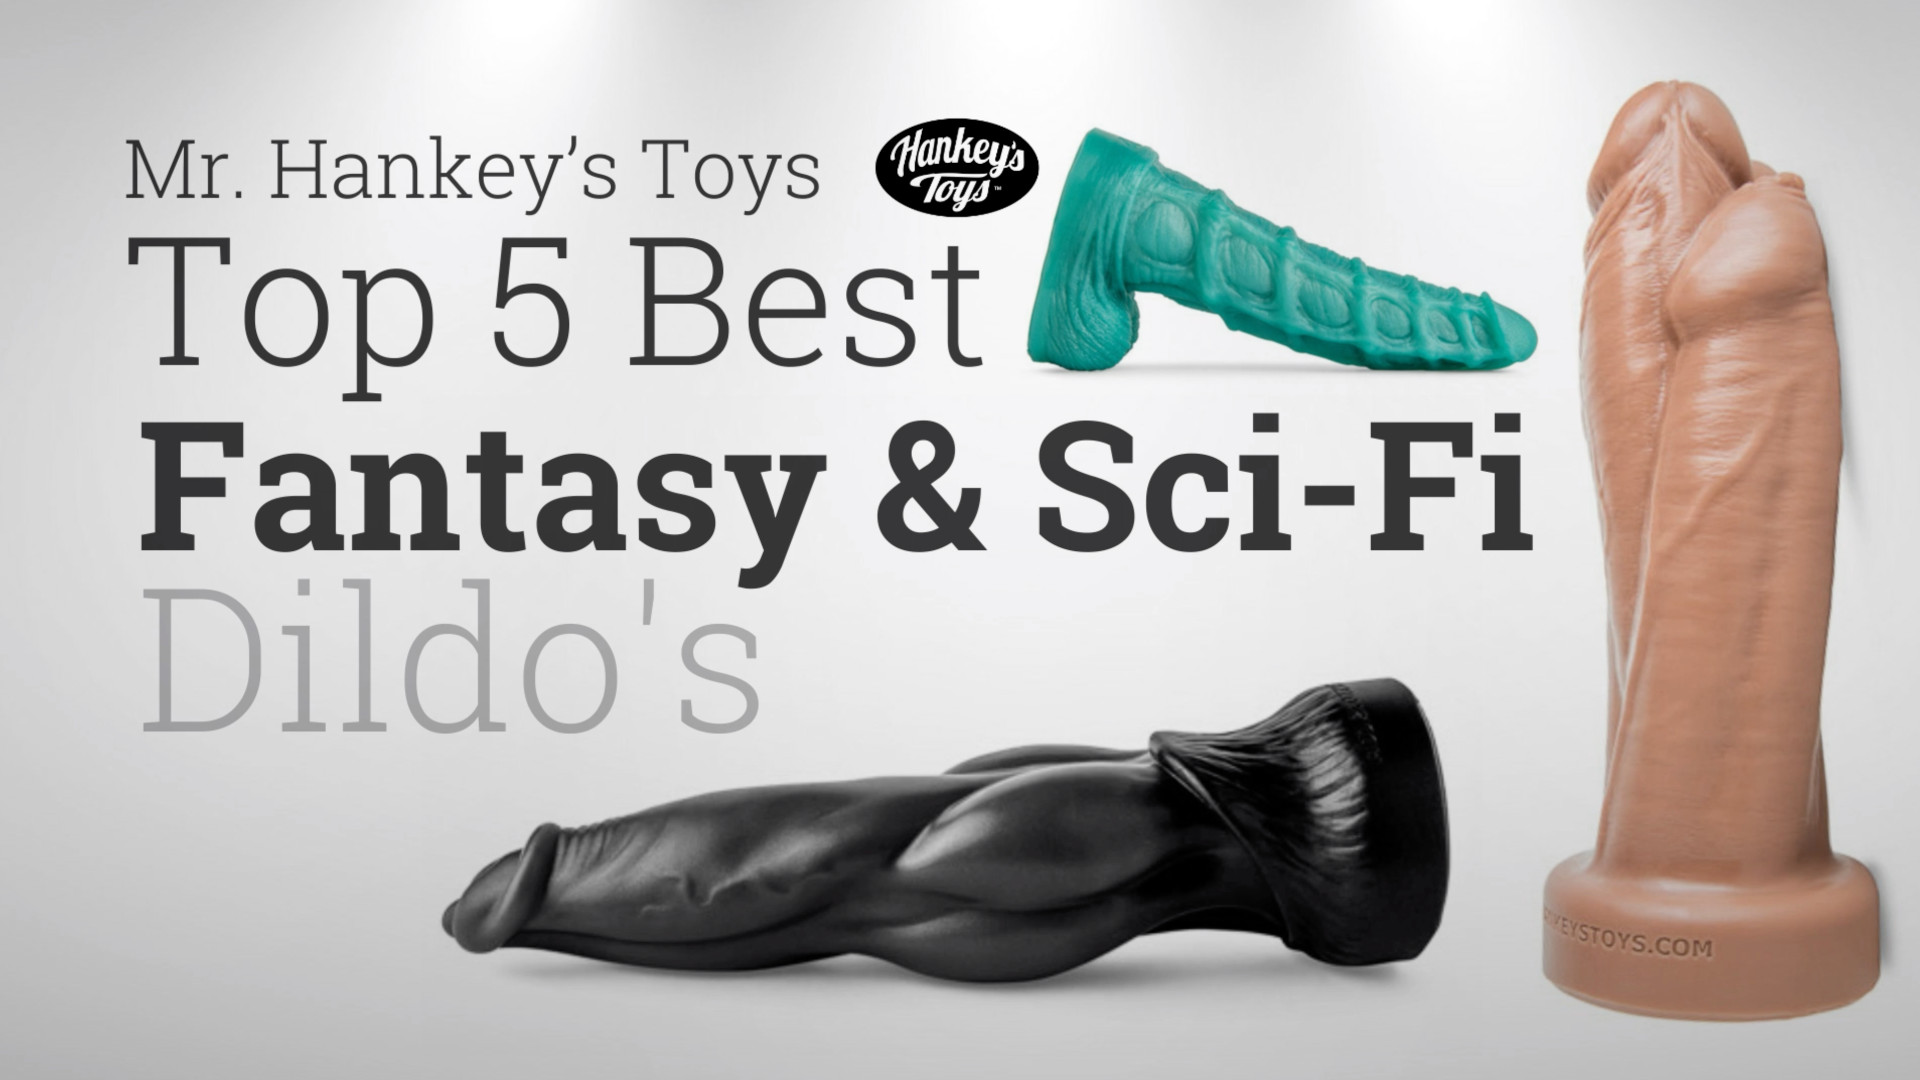 Mr. Hankey’s TOP 5 Best Fantasy & Sci-Fi Dildos – Take a look at Mr. Hankeys Monster dildo collection And why you should get one